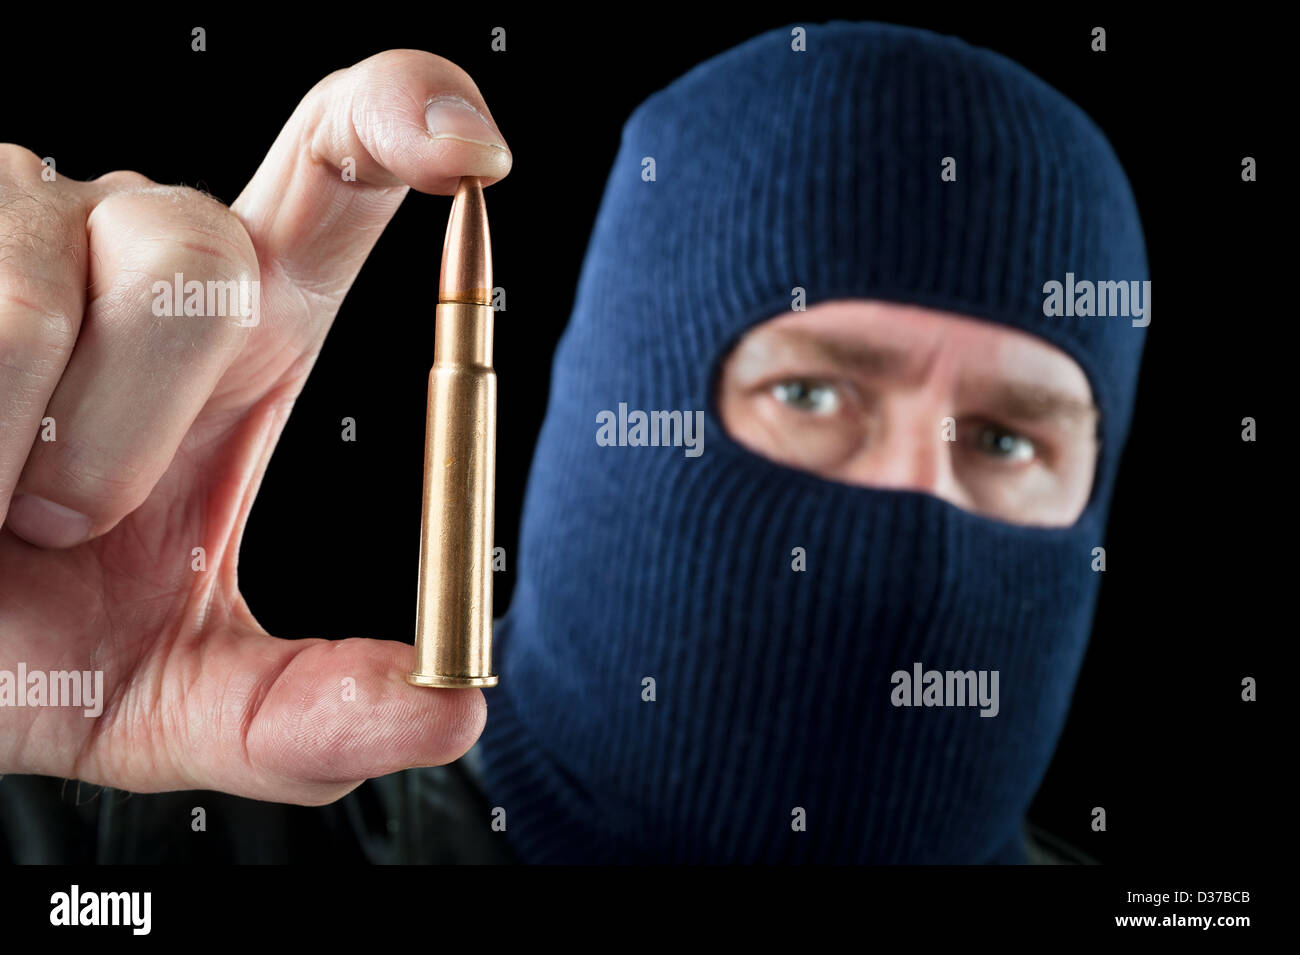 A terrorist wearing a ski mask as a disguise holds out a large automatic rifle bullet. Stock Photo